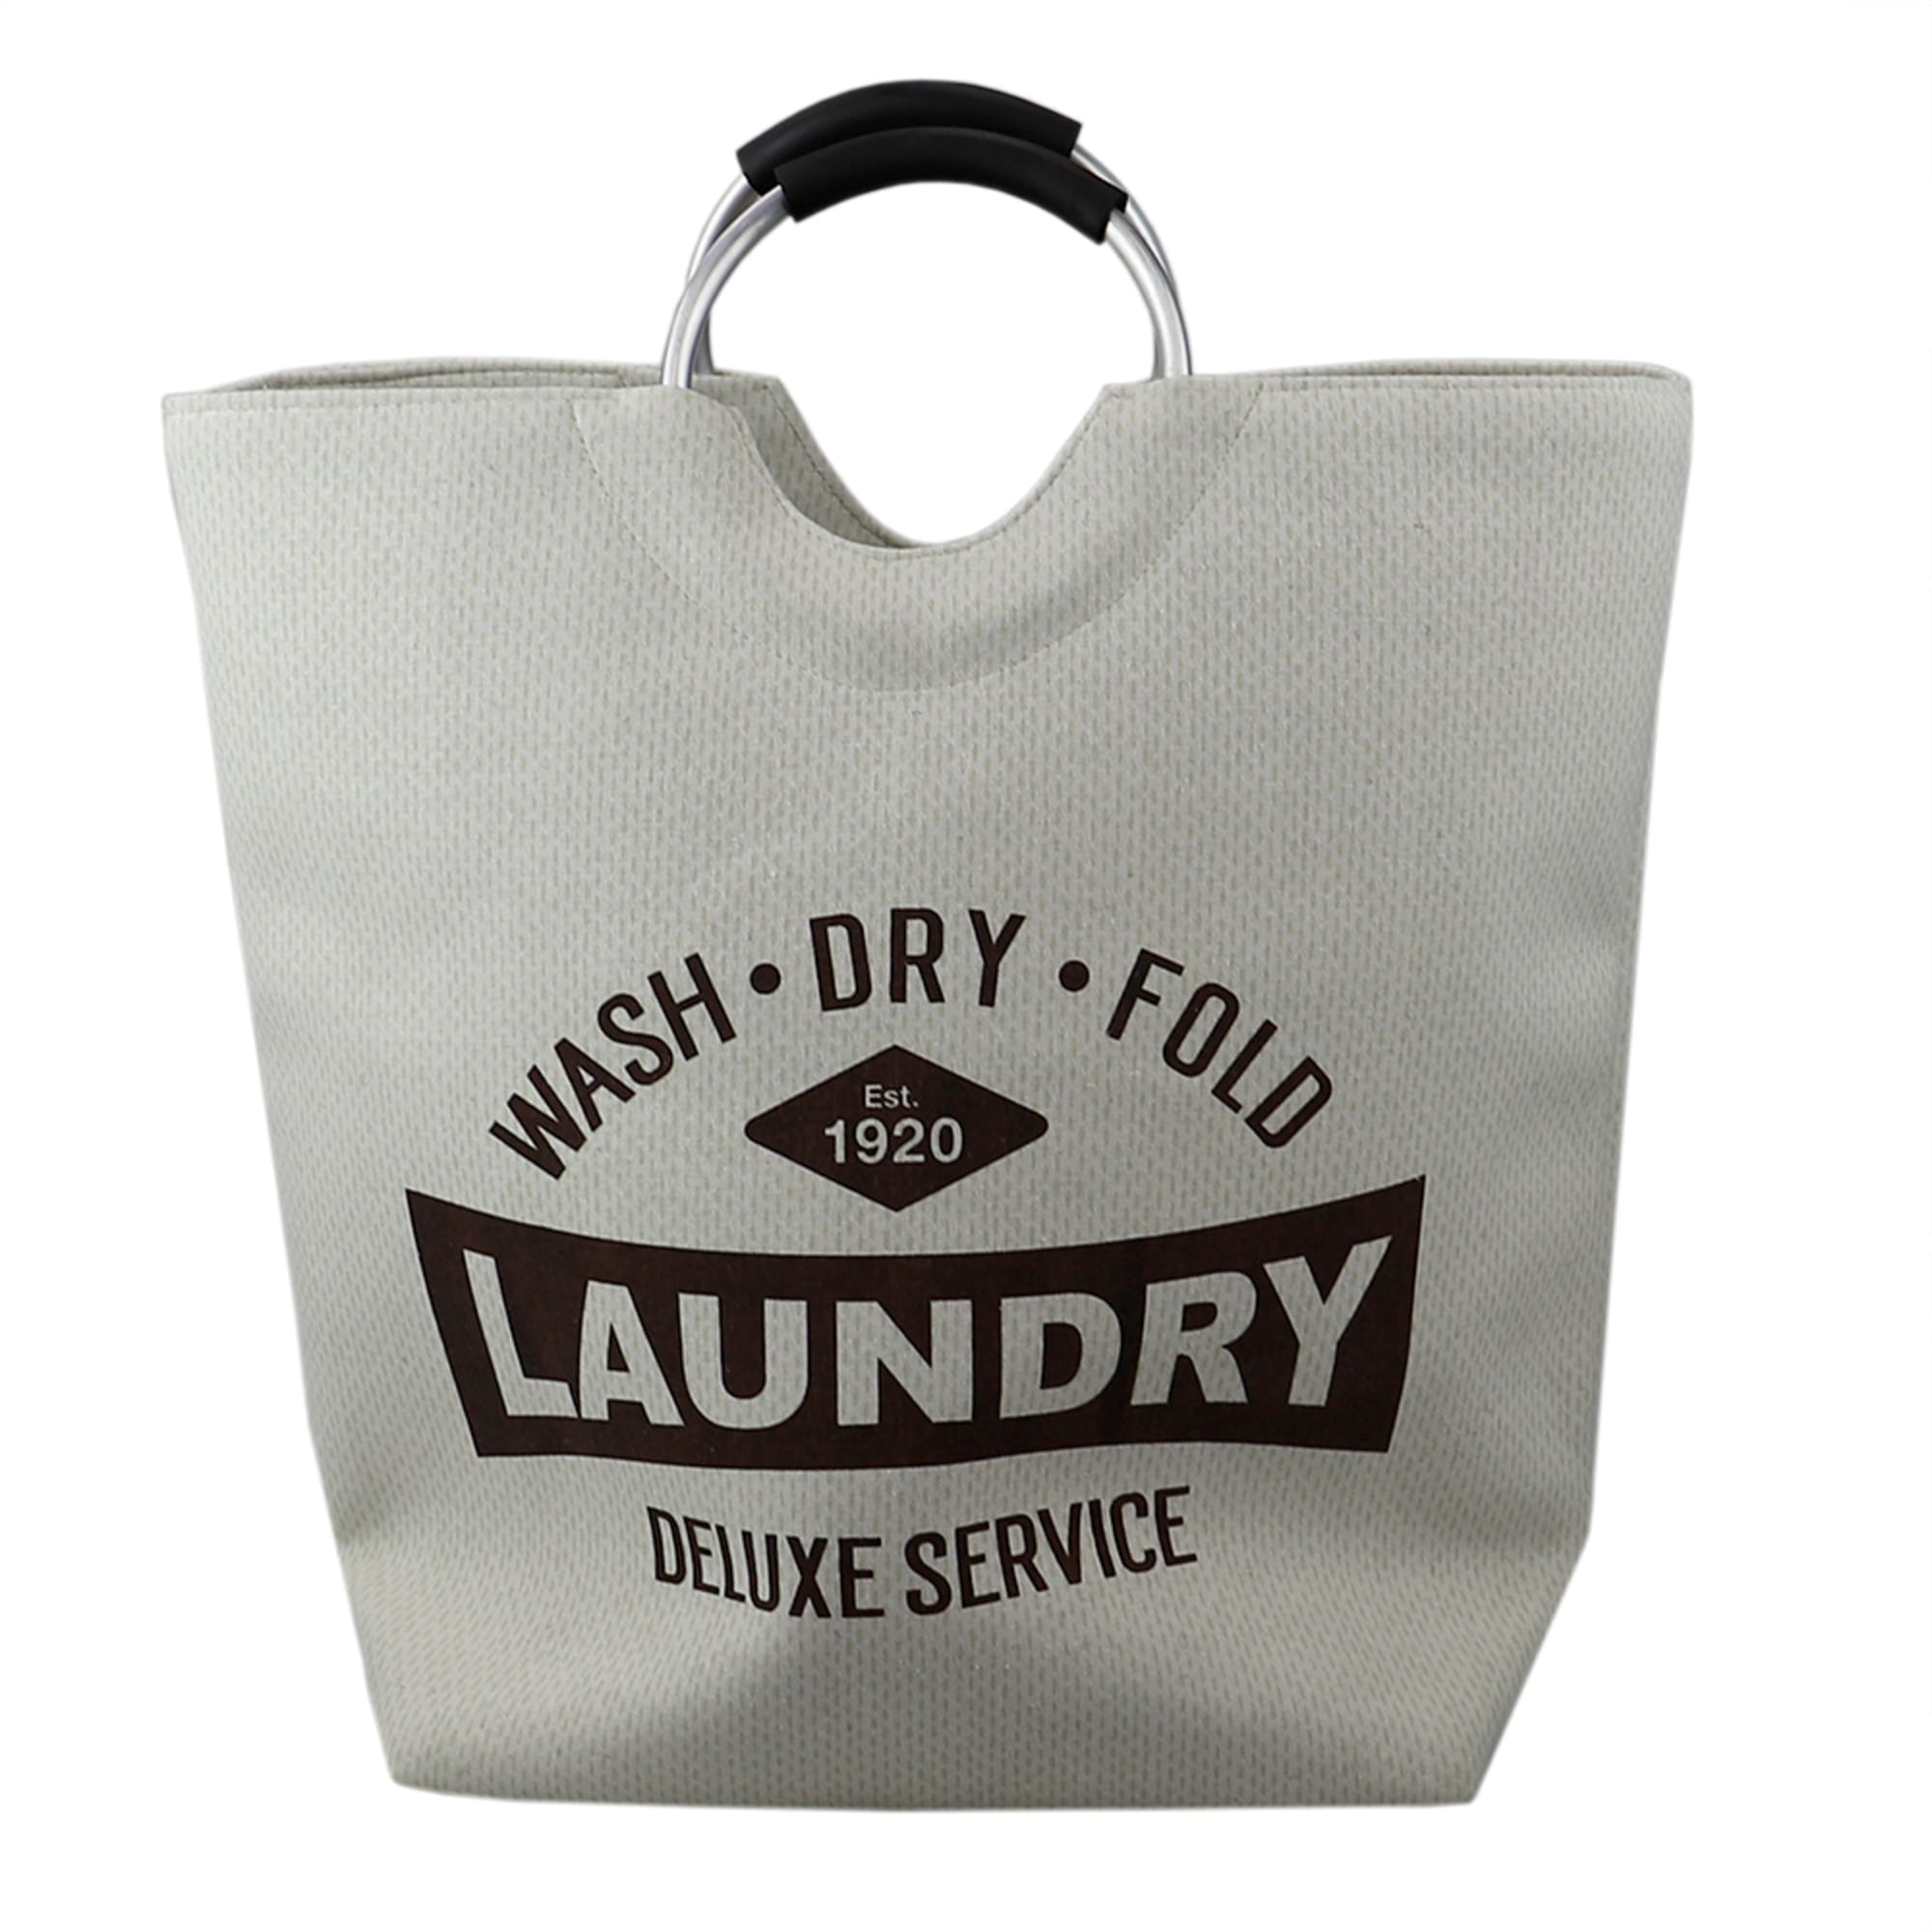 Home Basics Deluxe Service Wash Dry Fold Canvas Laundry Tote with Soft Grip Padded Aluminum Handles, Natural $12 EACH, CASE PACK OF 6